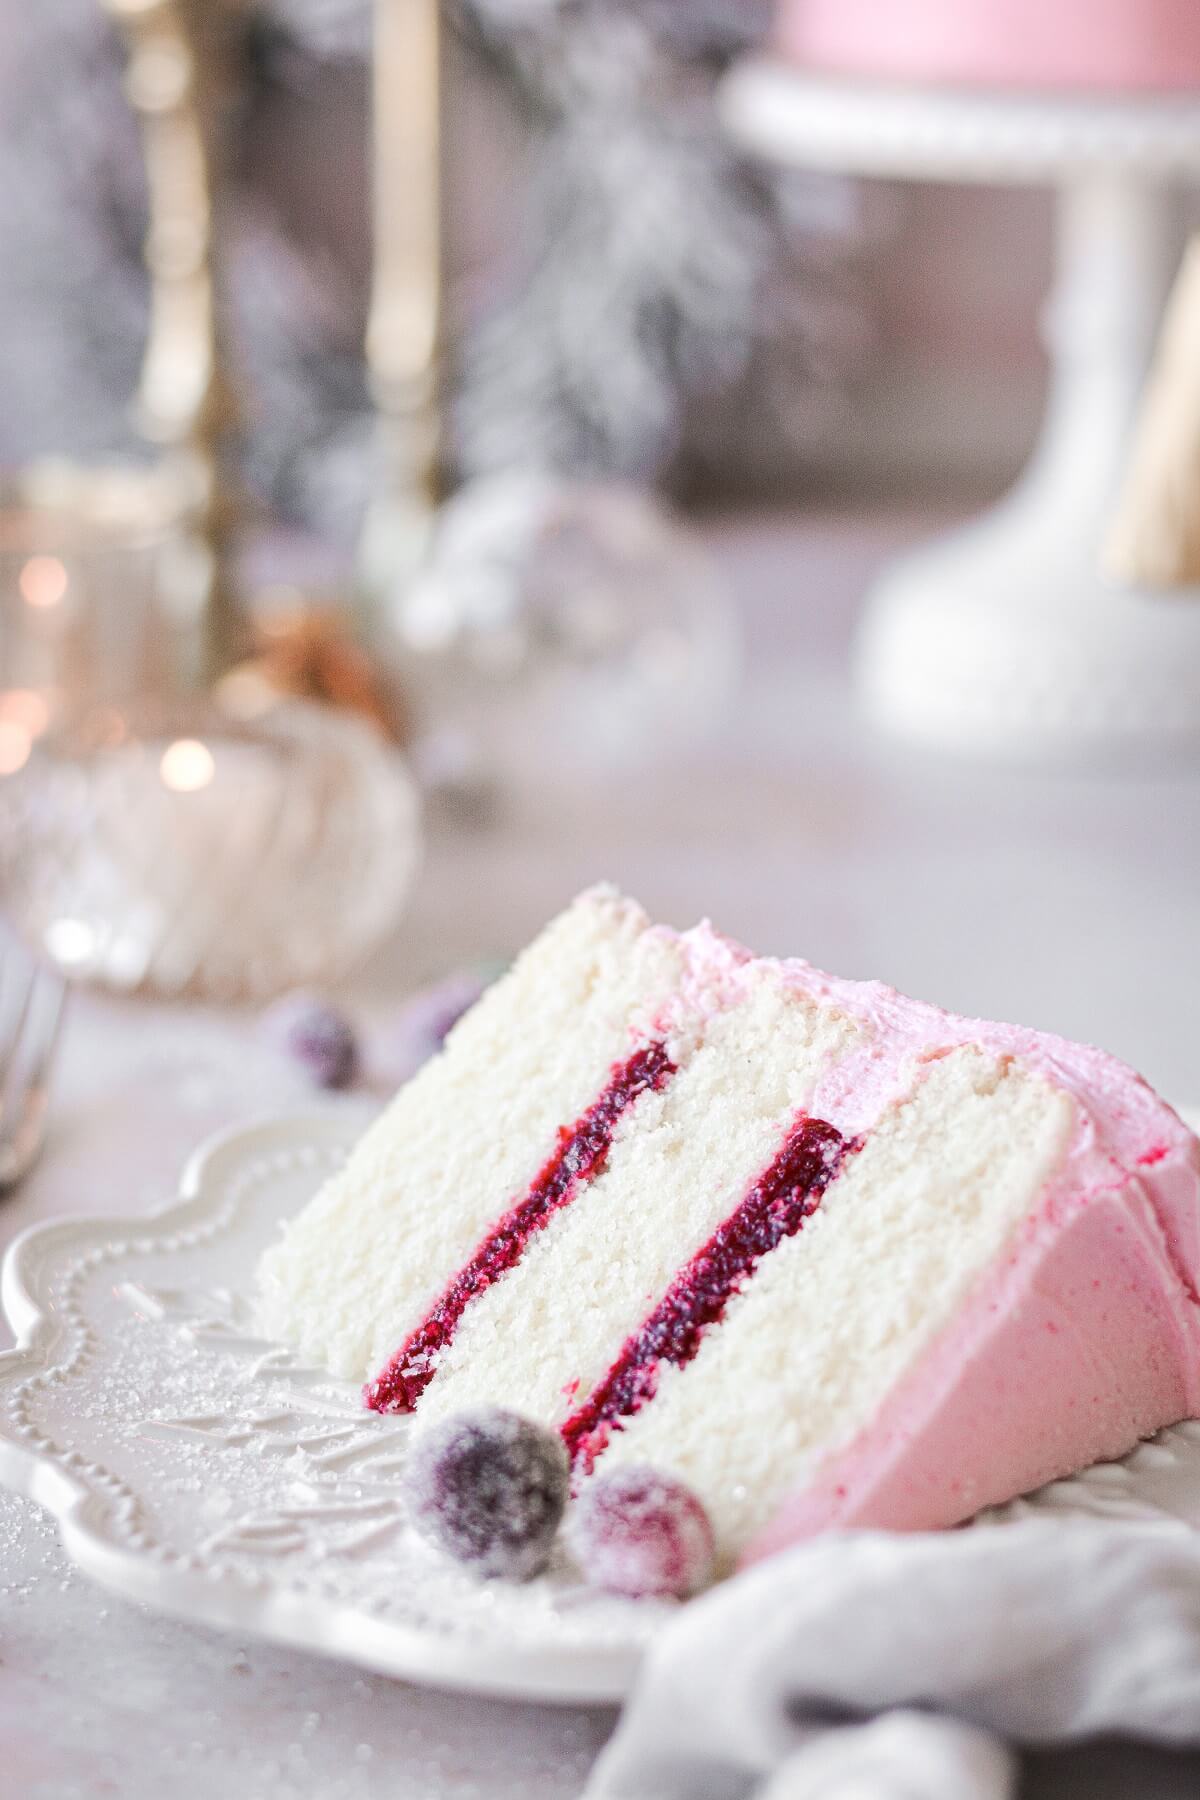 A slice of cranberry cake on a white plate.